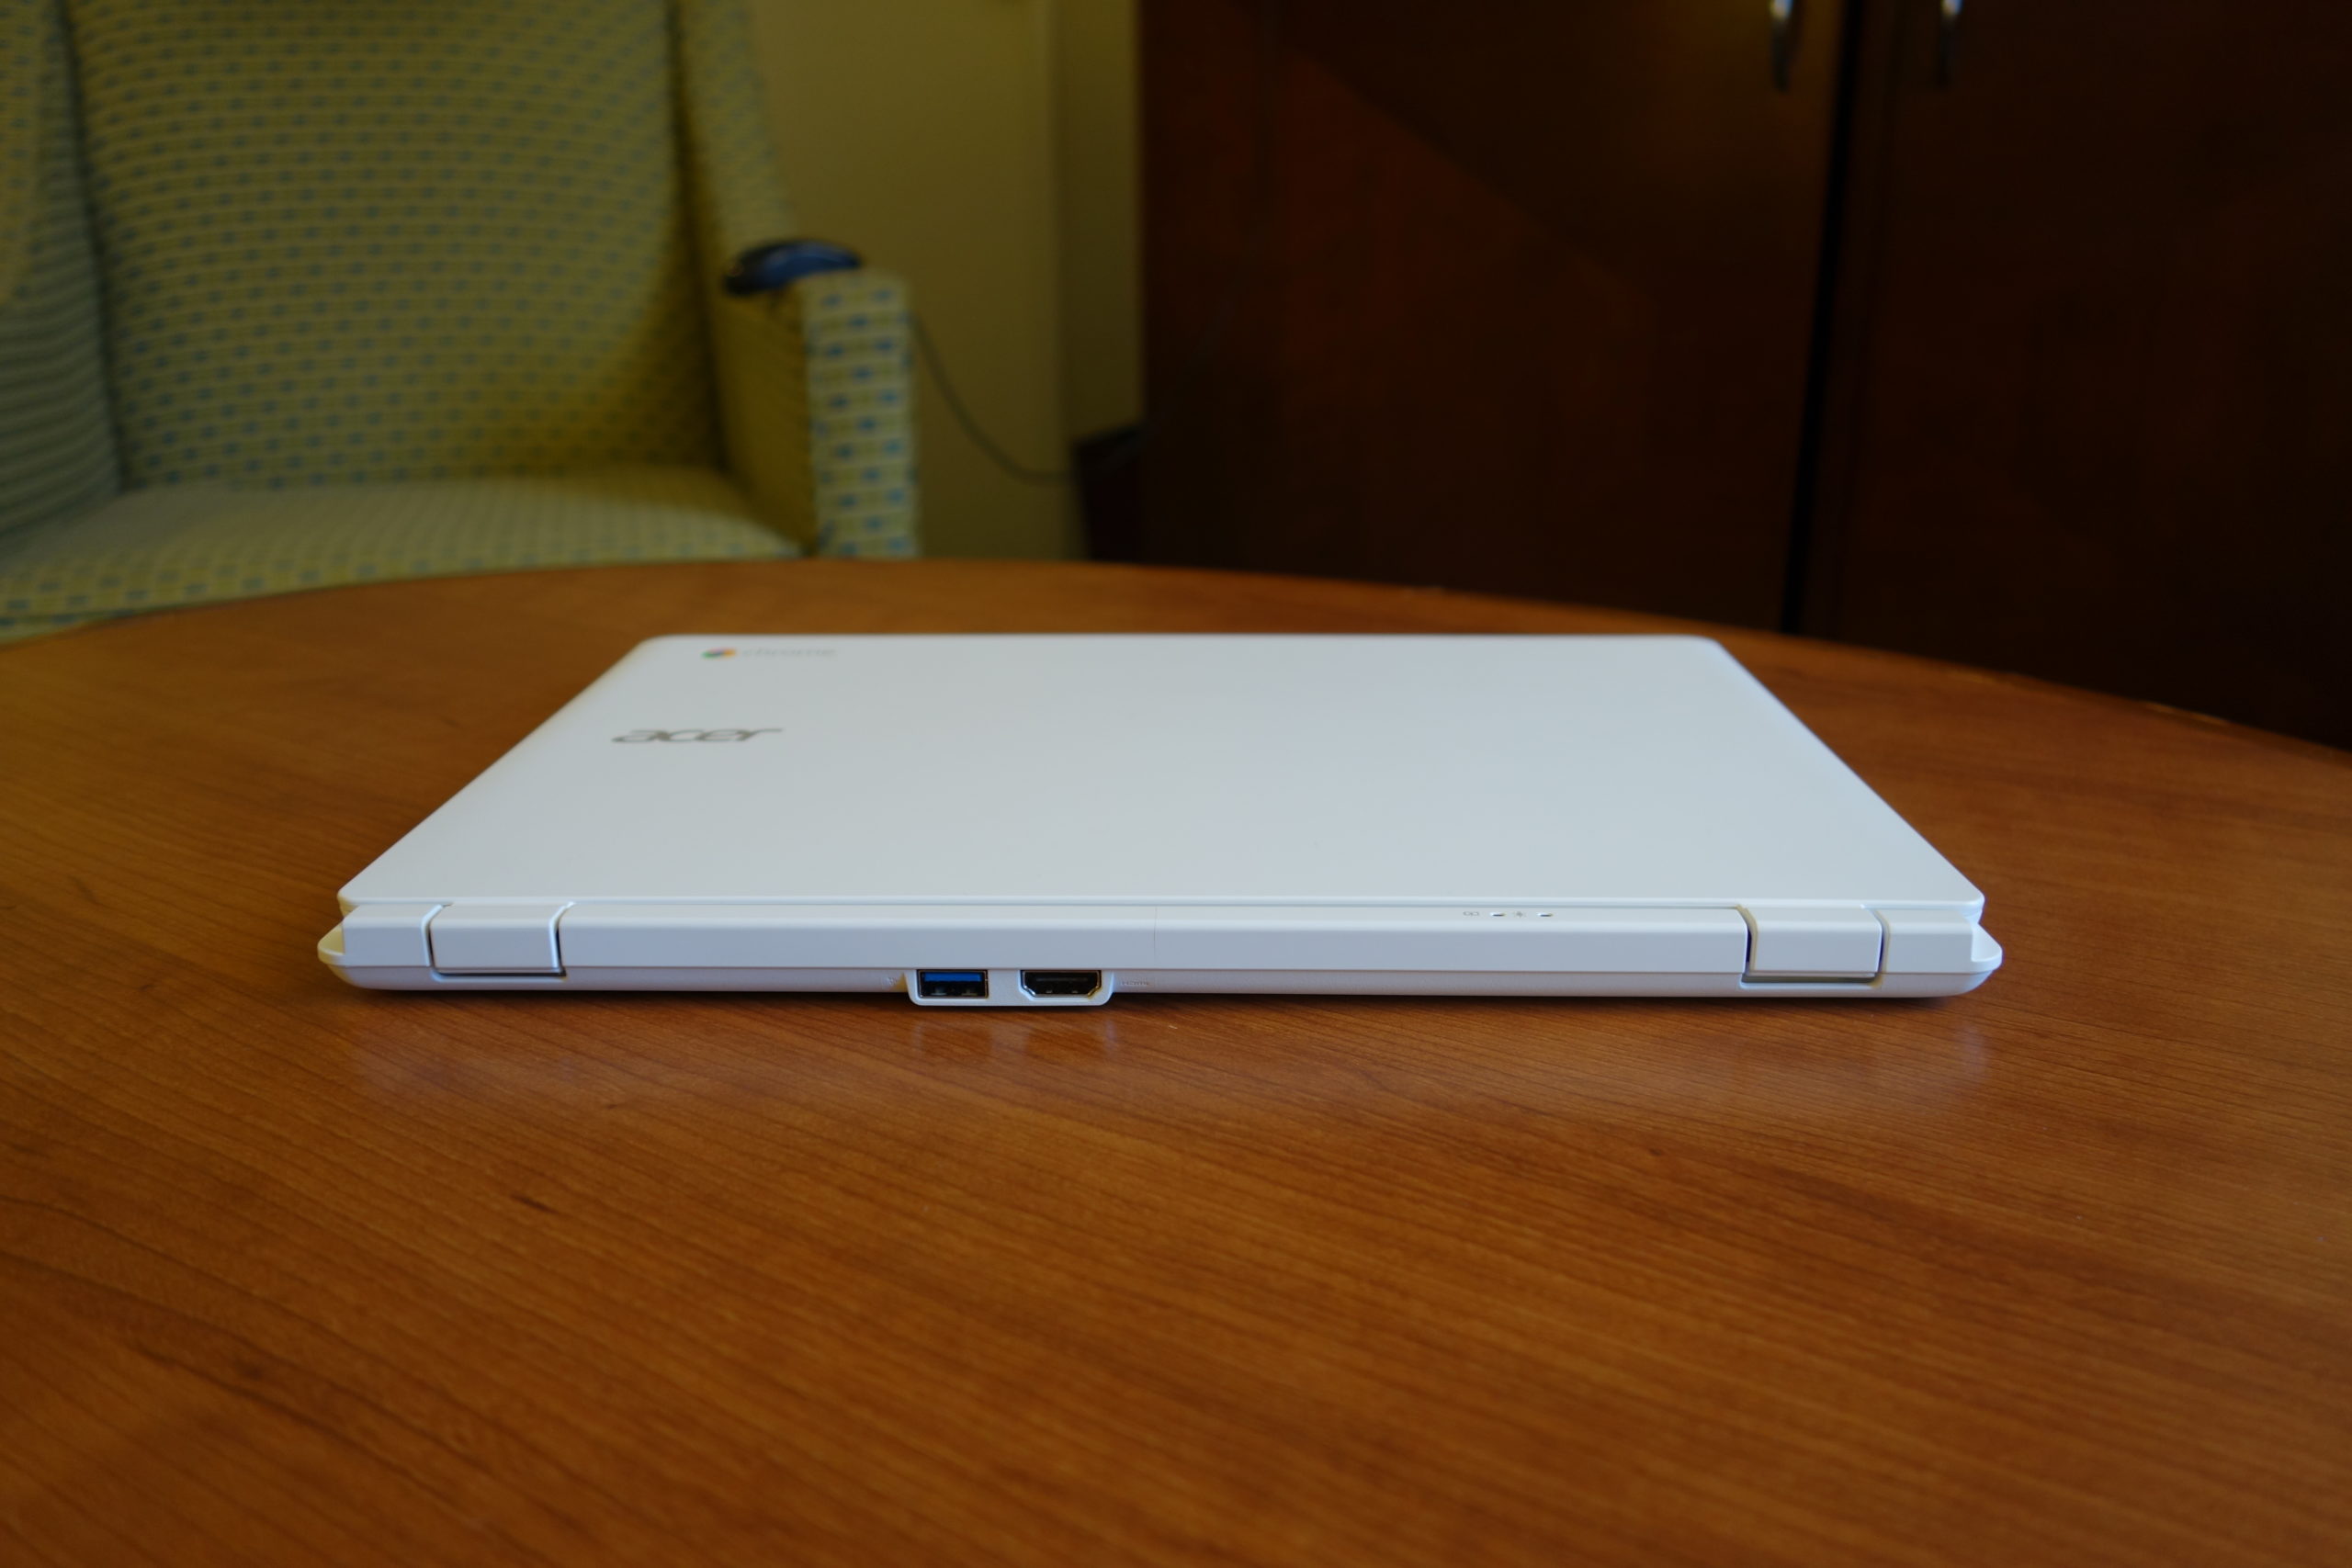 Acer Chromebook 13 Hands-On: Gaming Guts In A Chromebook Body